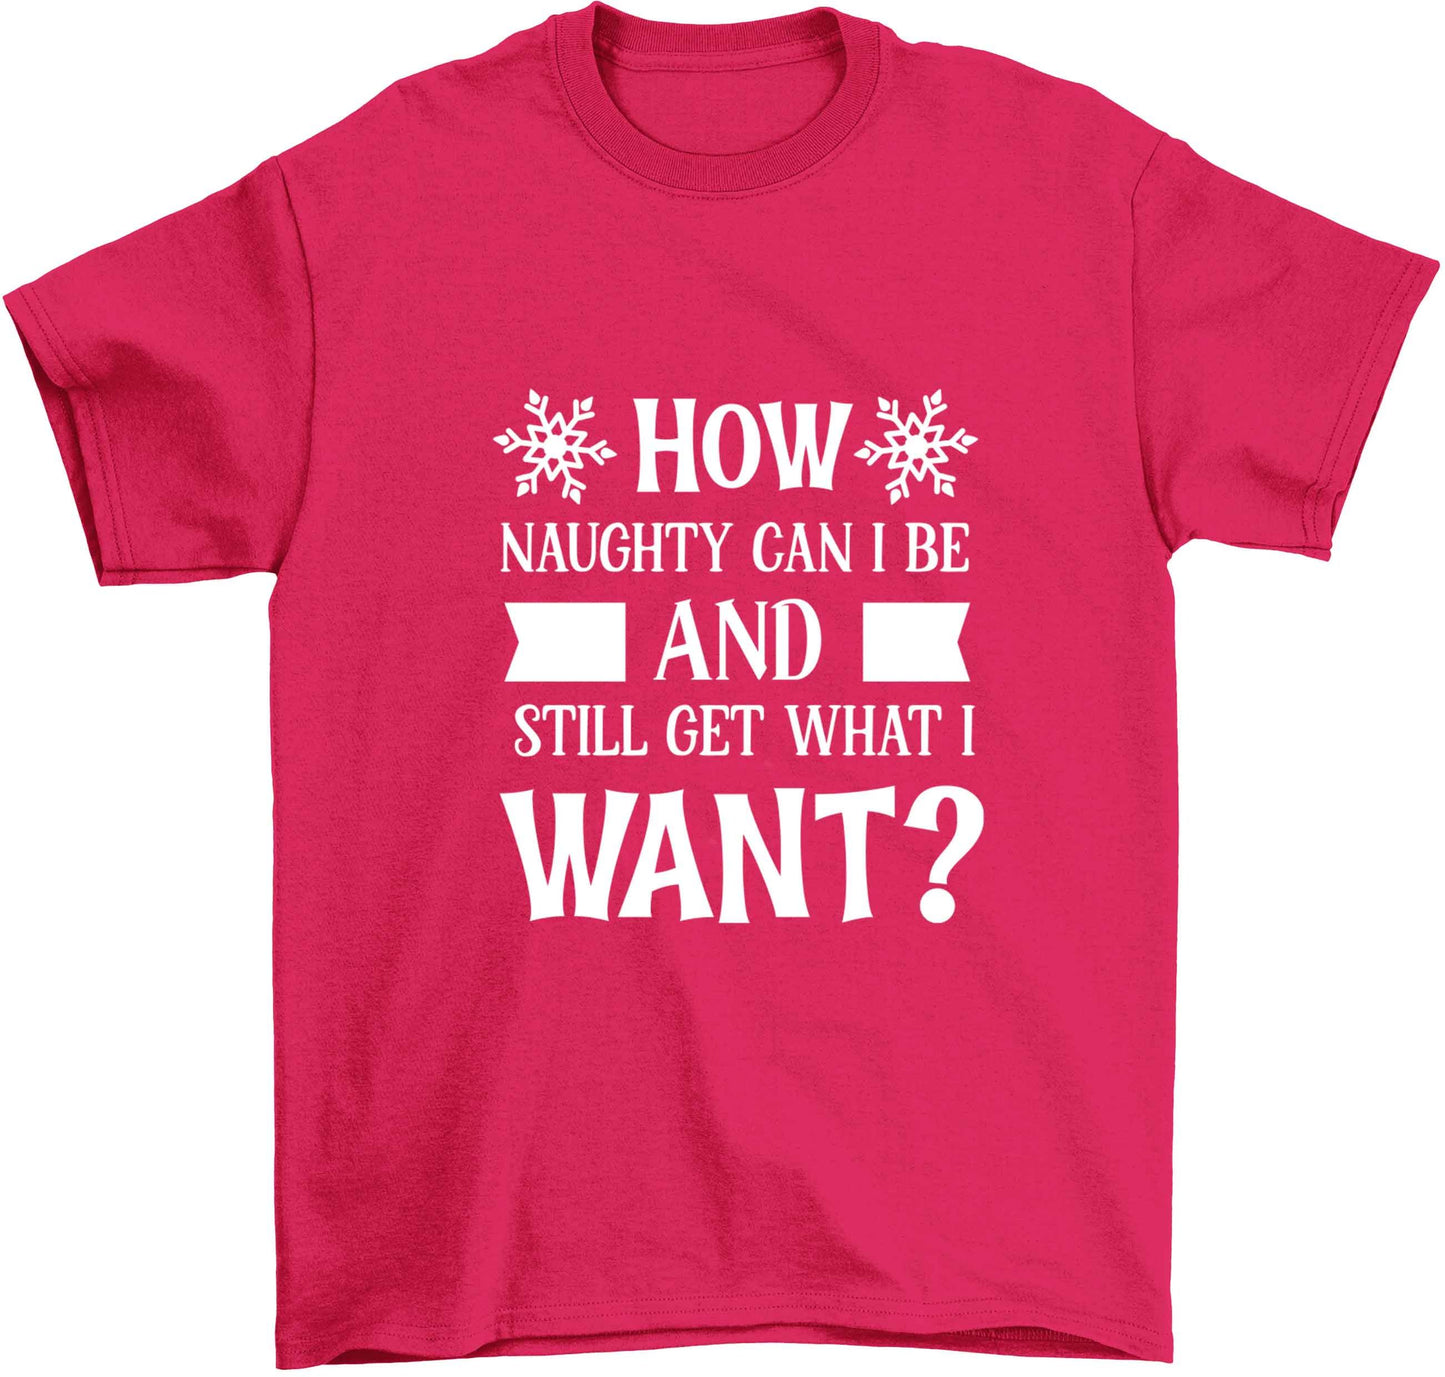 How naughty can I be and still get what I want? Children's pink Tshirt 12-13 Years